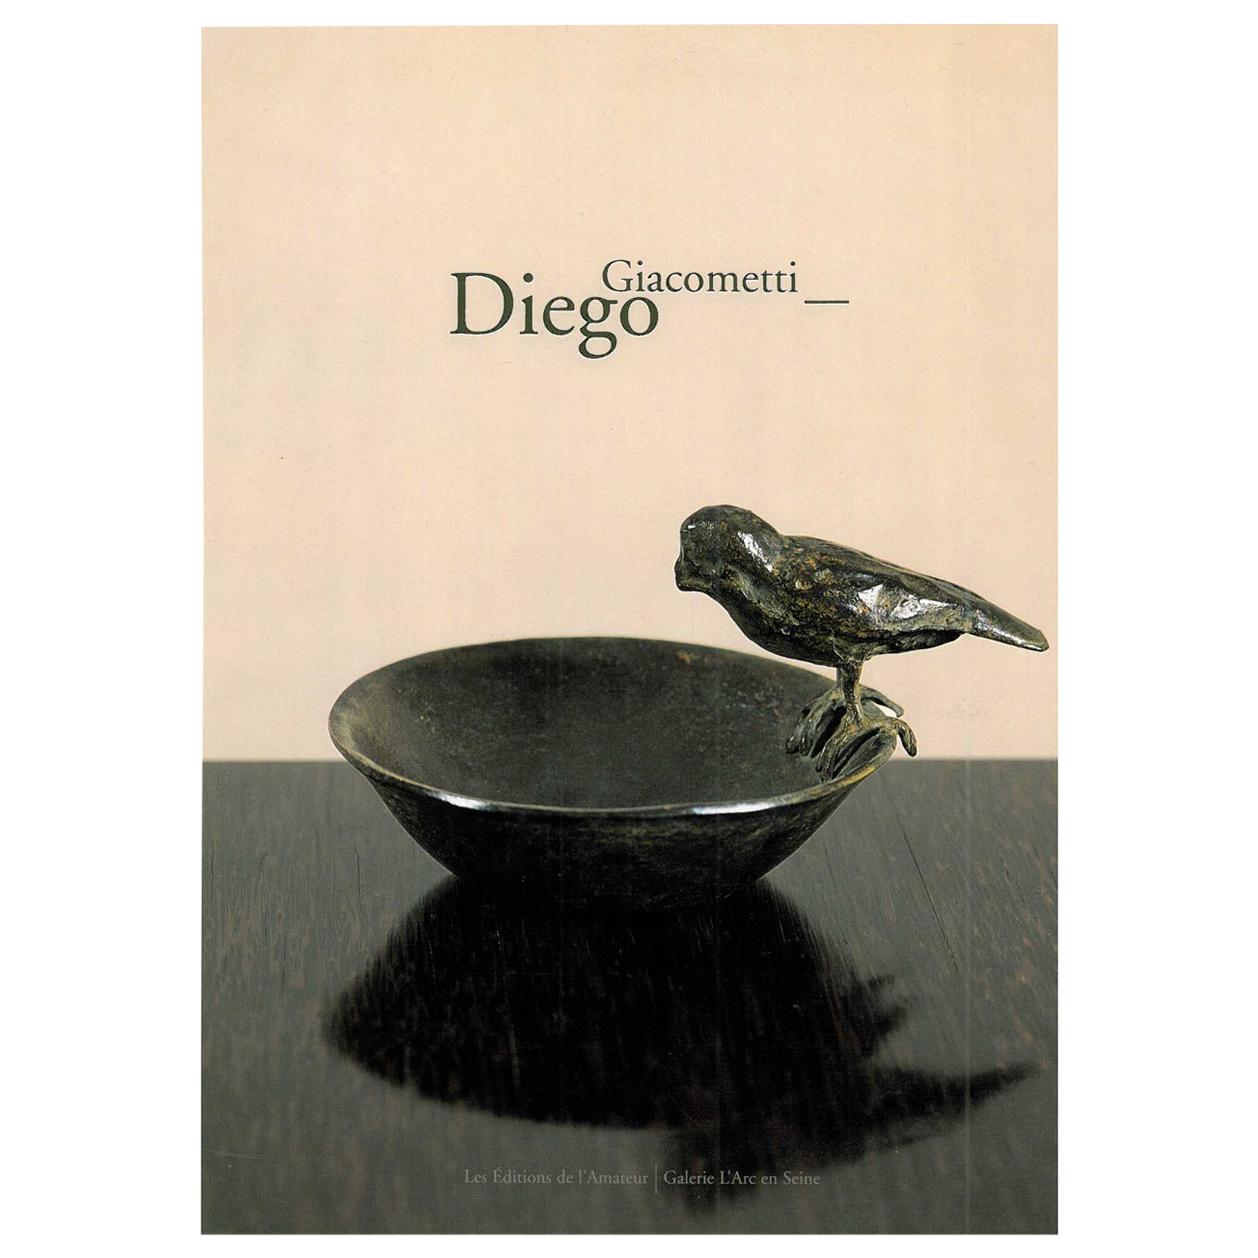 Diego Giacometti by Christian Boutonnet & Rafael Ortiz (Book) For Sale